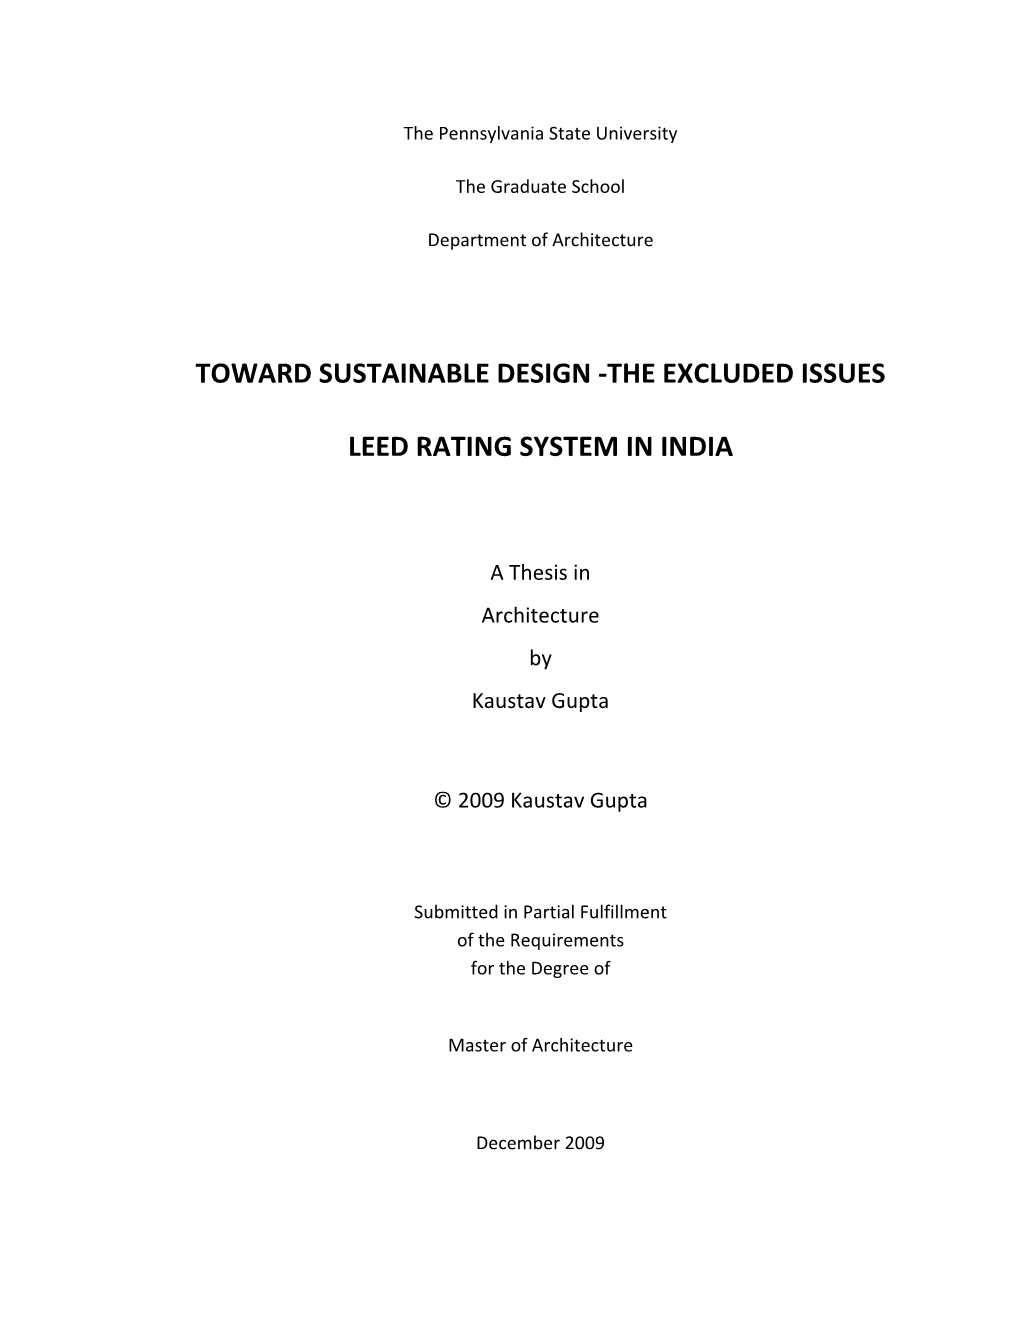 Toward Sustainable Design -The Excluded Issues Leed Rating System